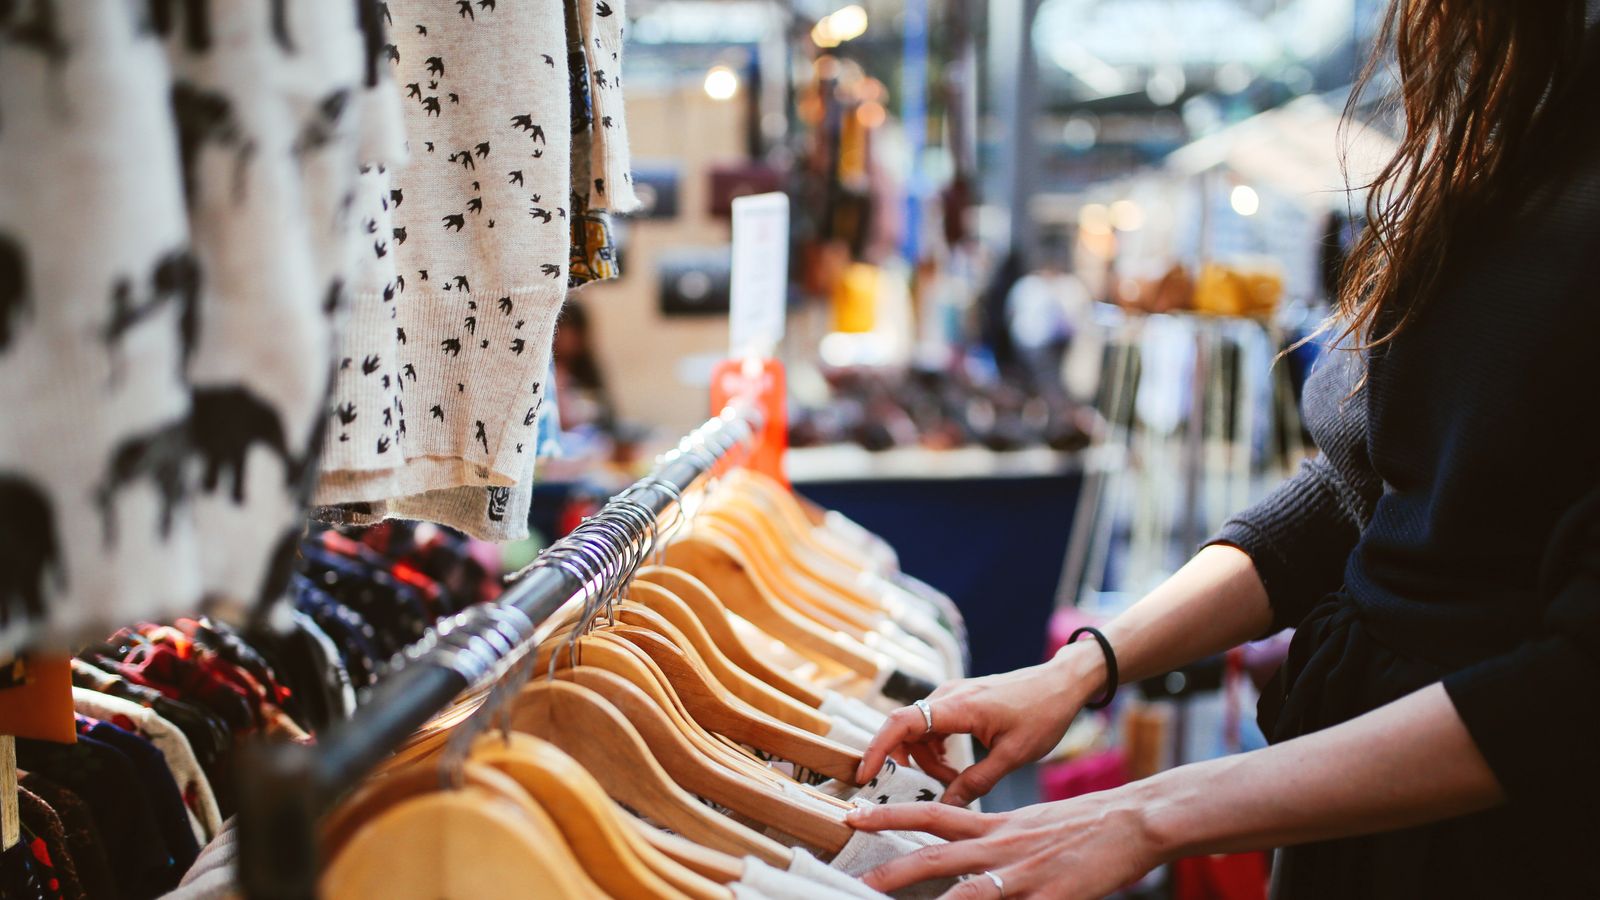 Big brands face pressure over fast fashion's impact | Business News ...